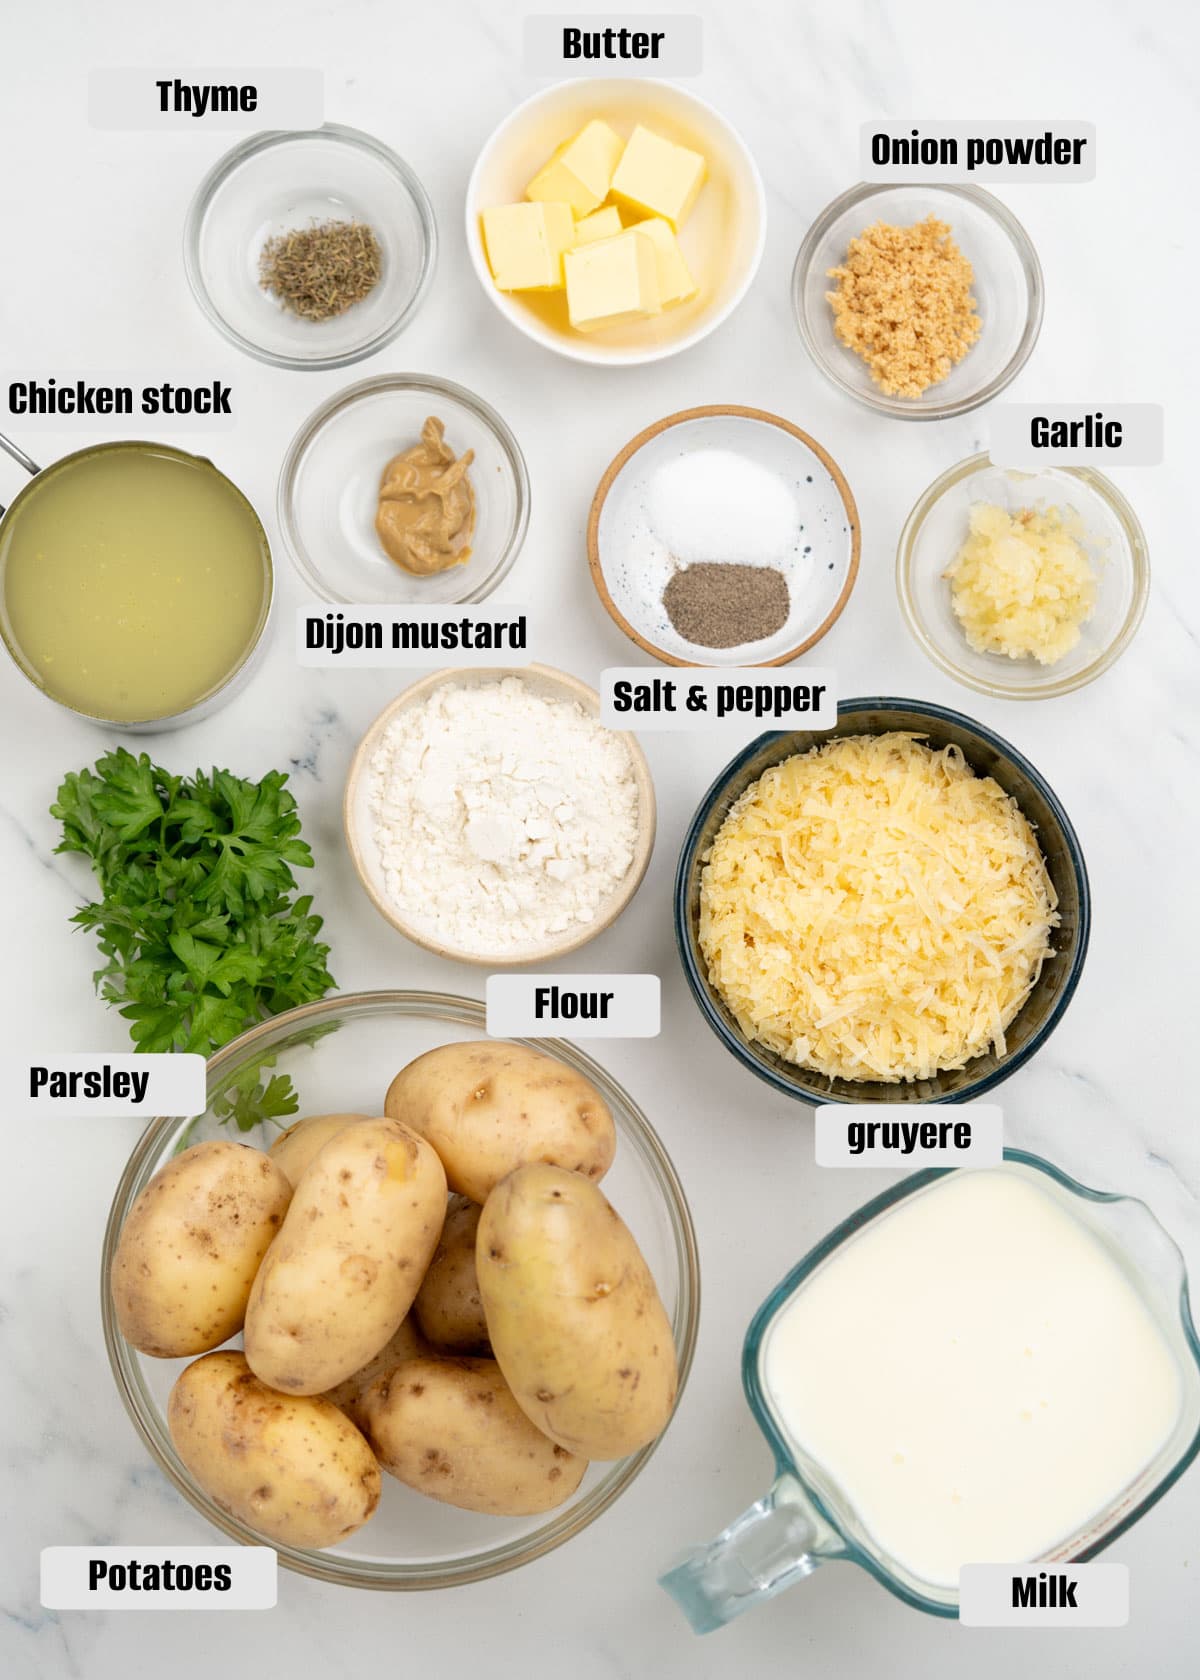 Ingredients needed to make creamy and cheesy scalloped potatoes. Add breadcrumbs and more cheese to get potato au gratin too.